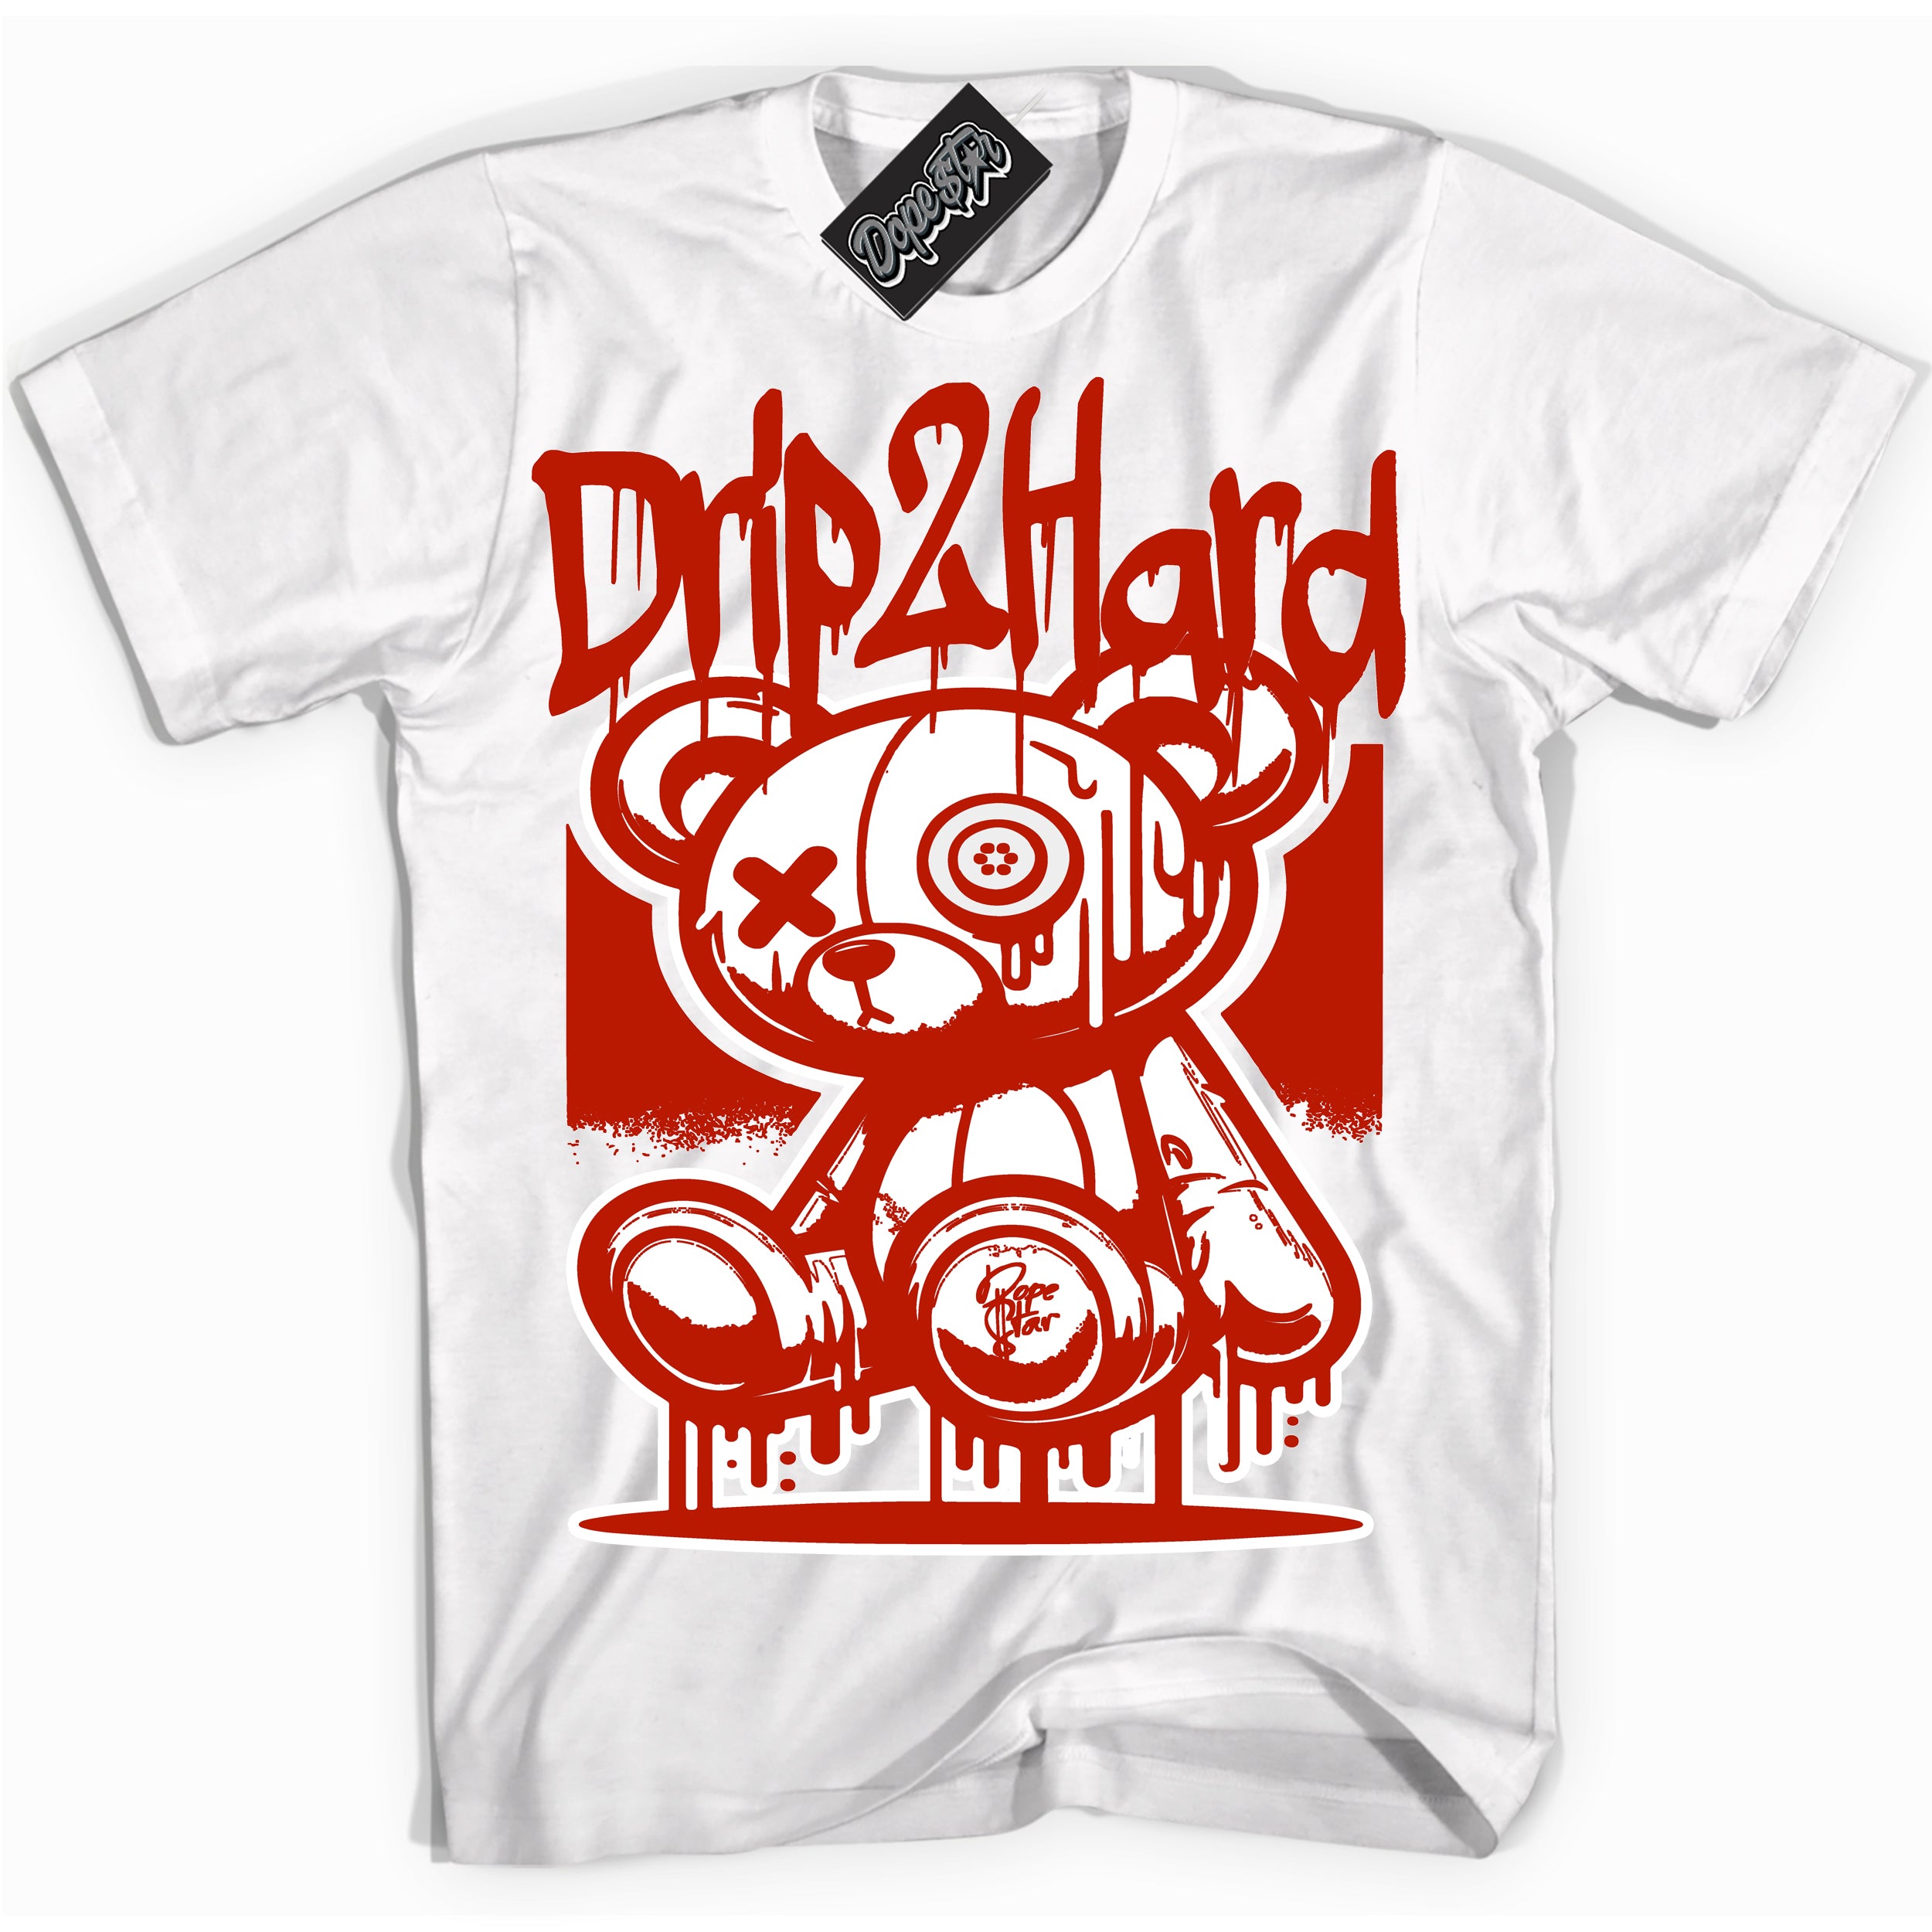 Cool White graphic tee with “ Drip 2 Hard ” design, that perfectly matches Cherry 11s